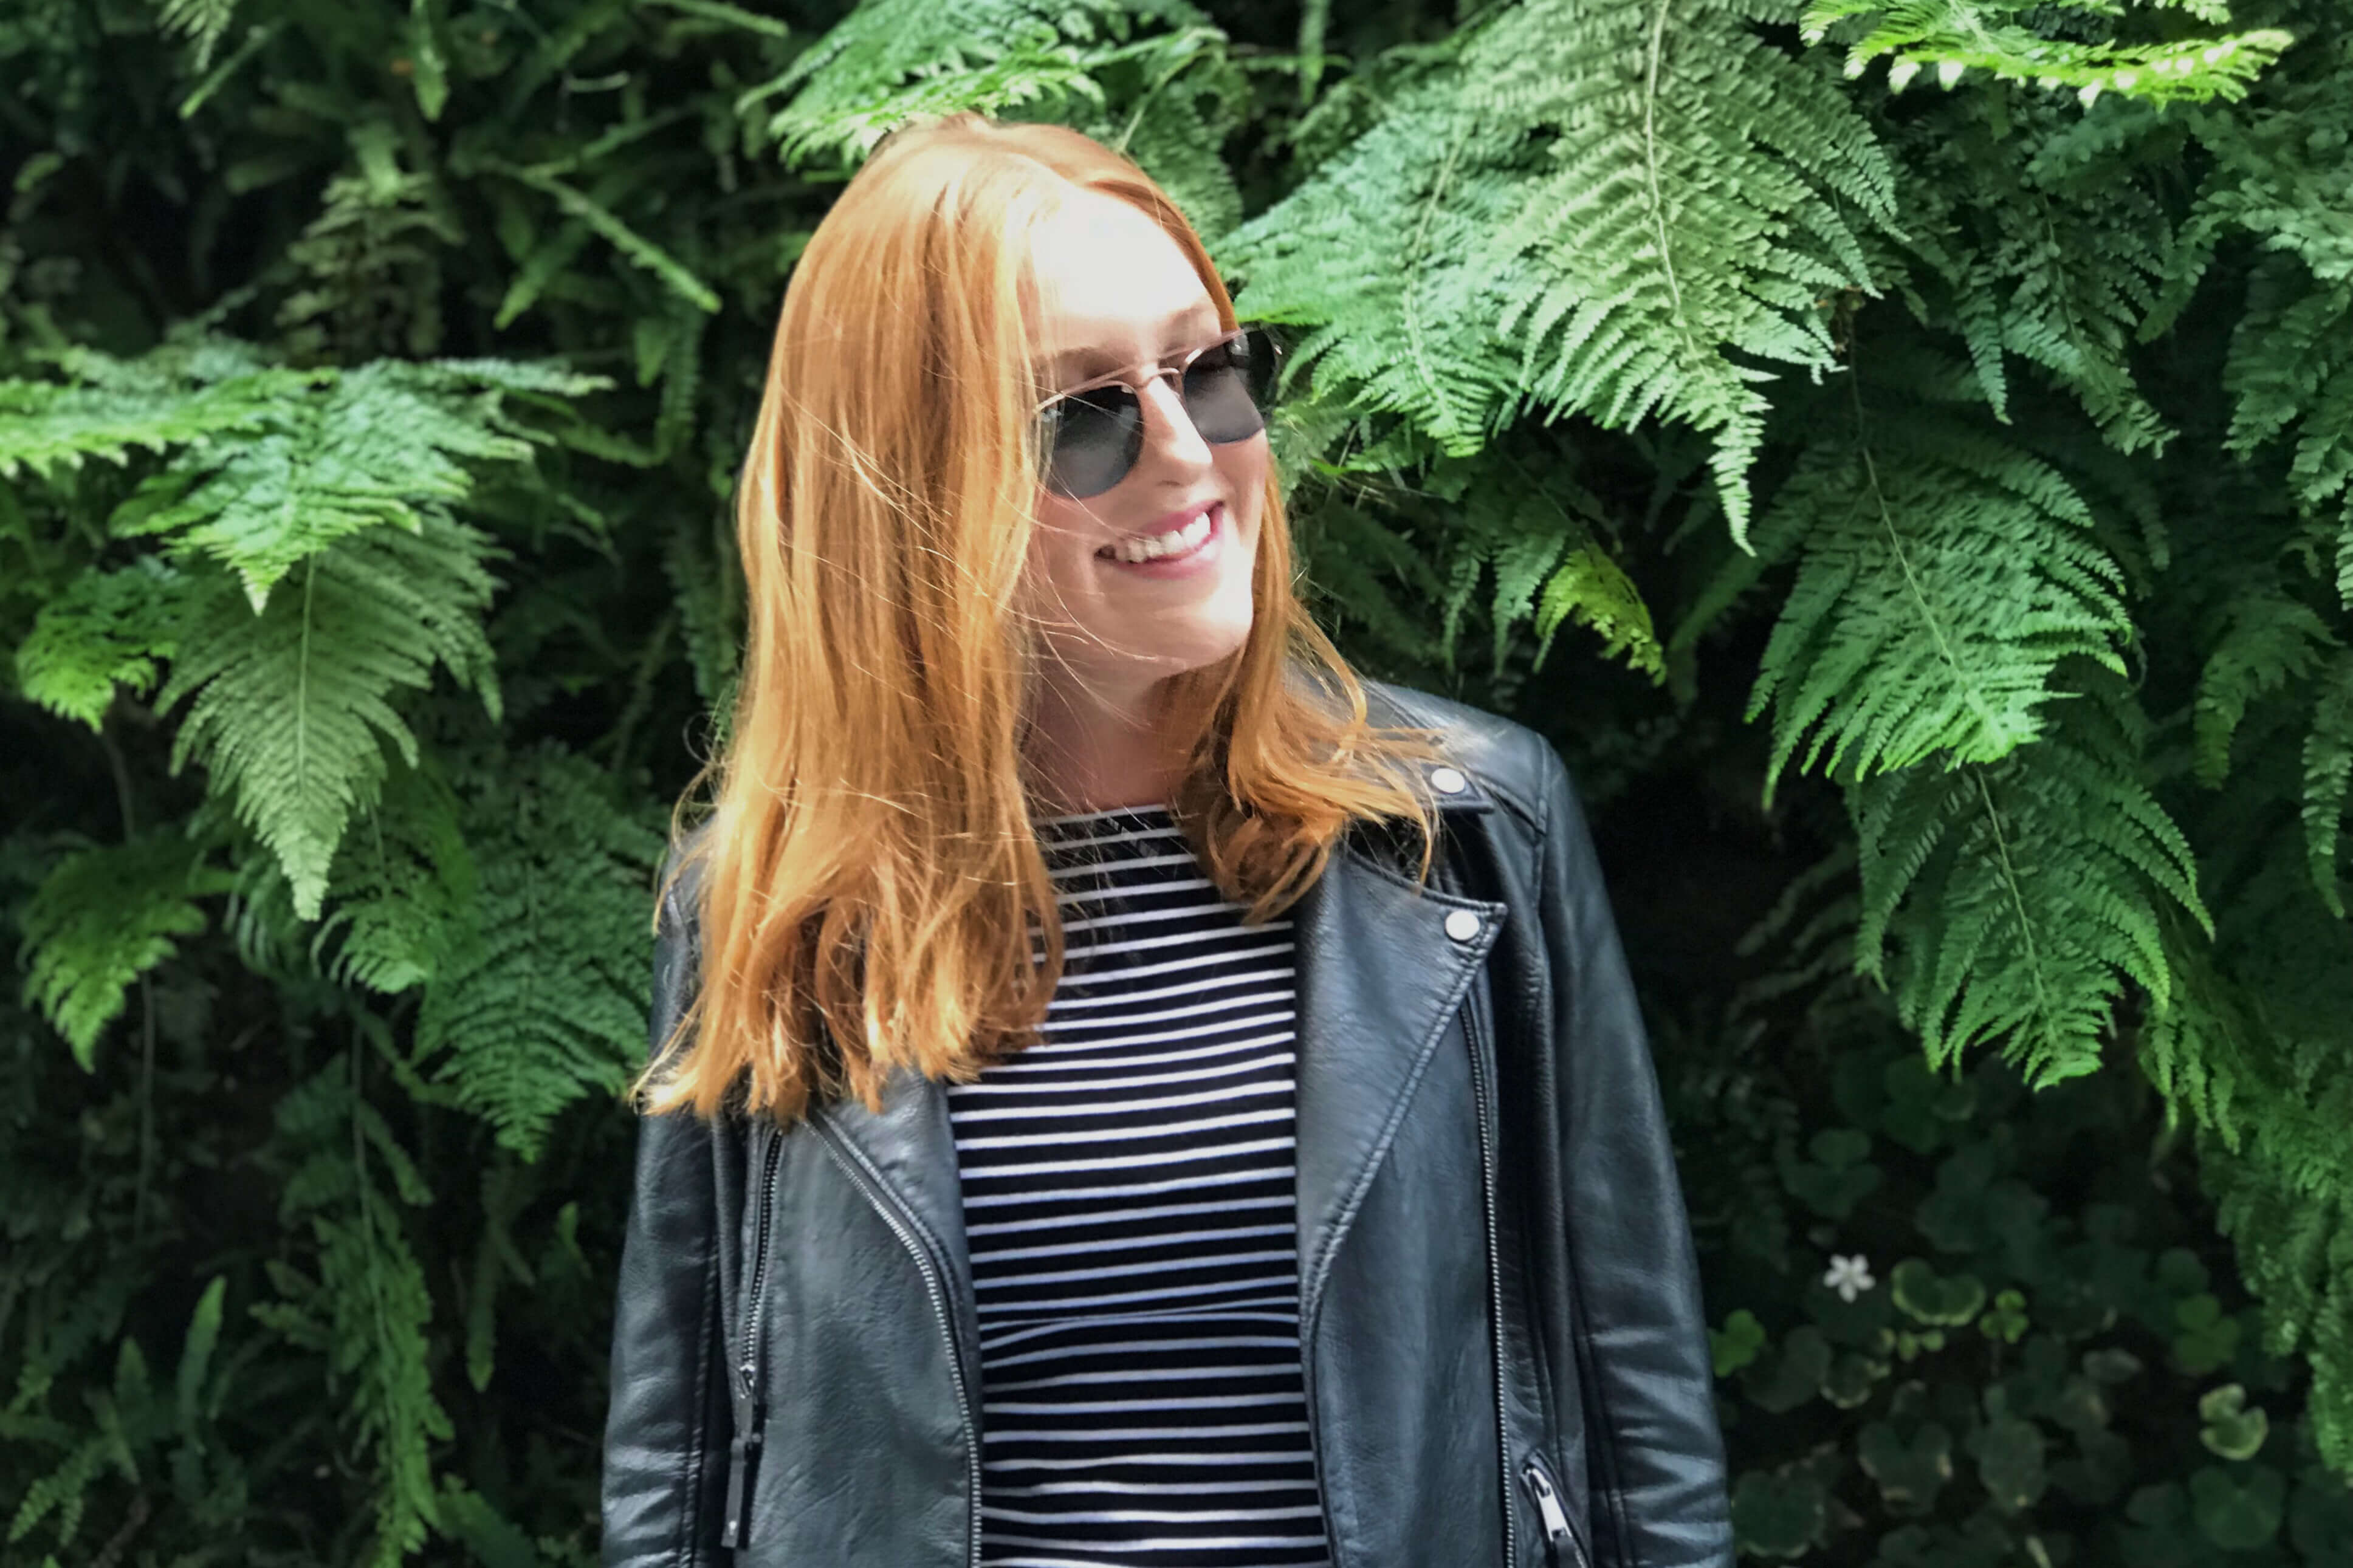 Sarah Downing smiles in front of ferns while wearing sunglasses, a leather jacket, and a striped shirt